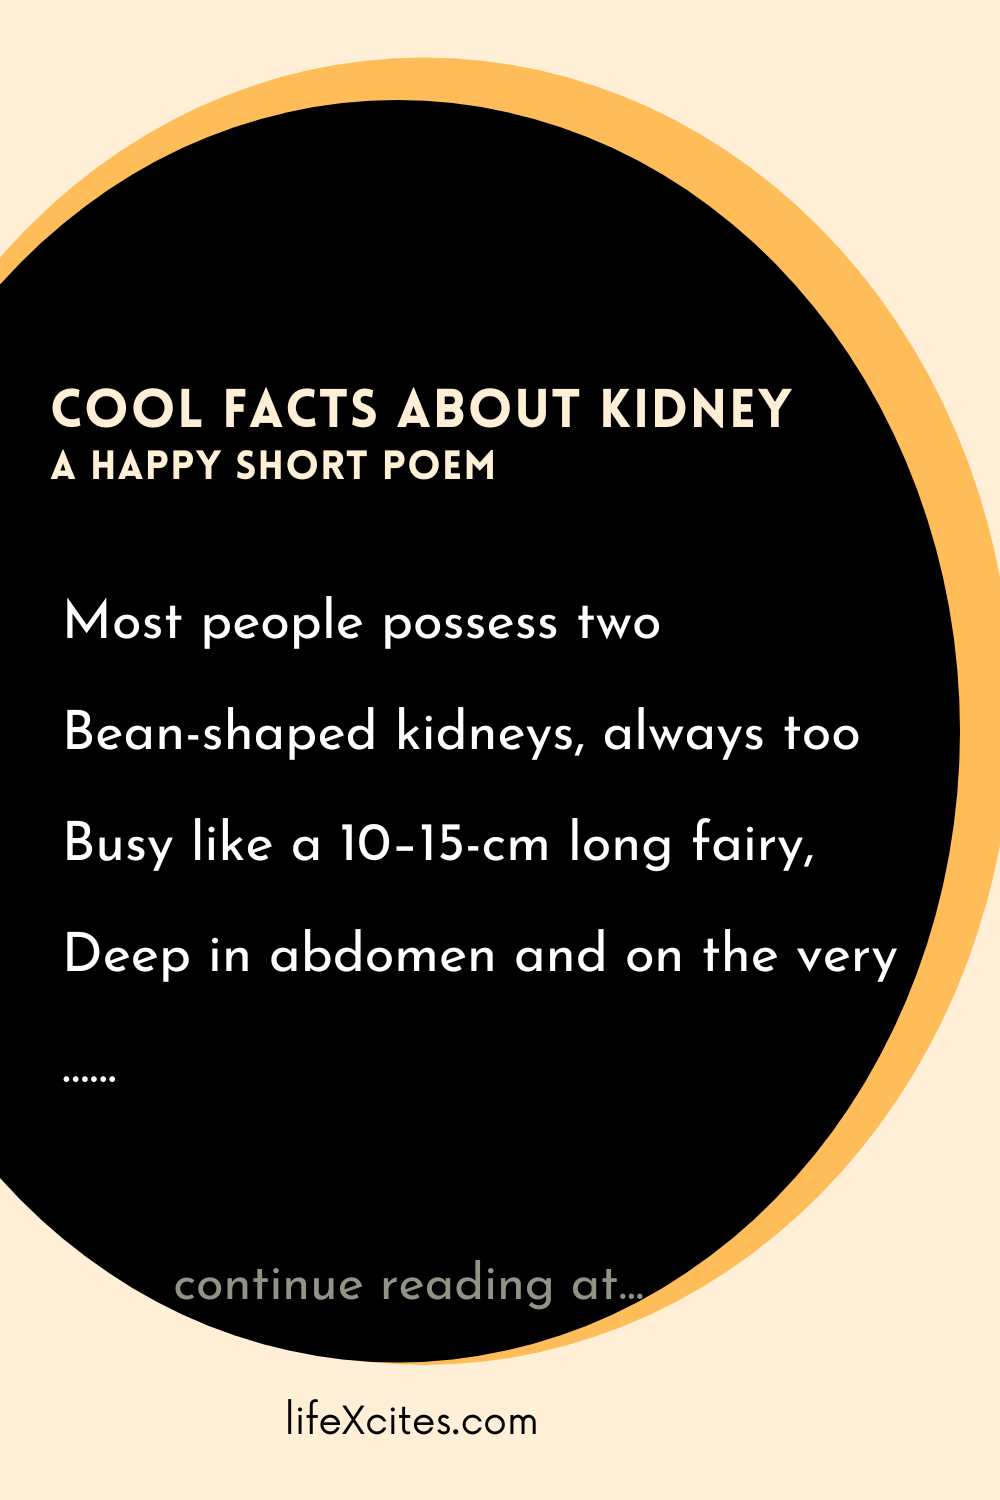 Cool Facts about Kidney – A Happy Short Poem